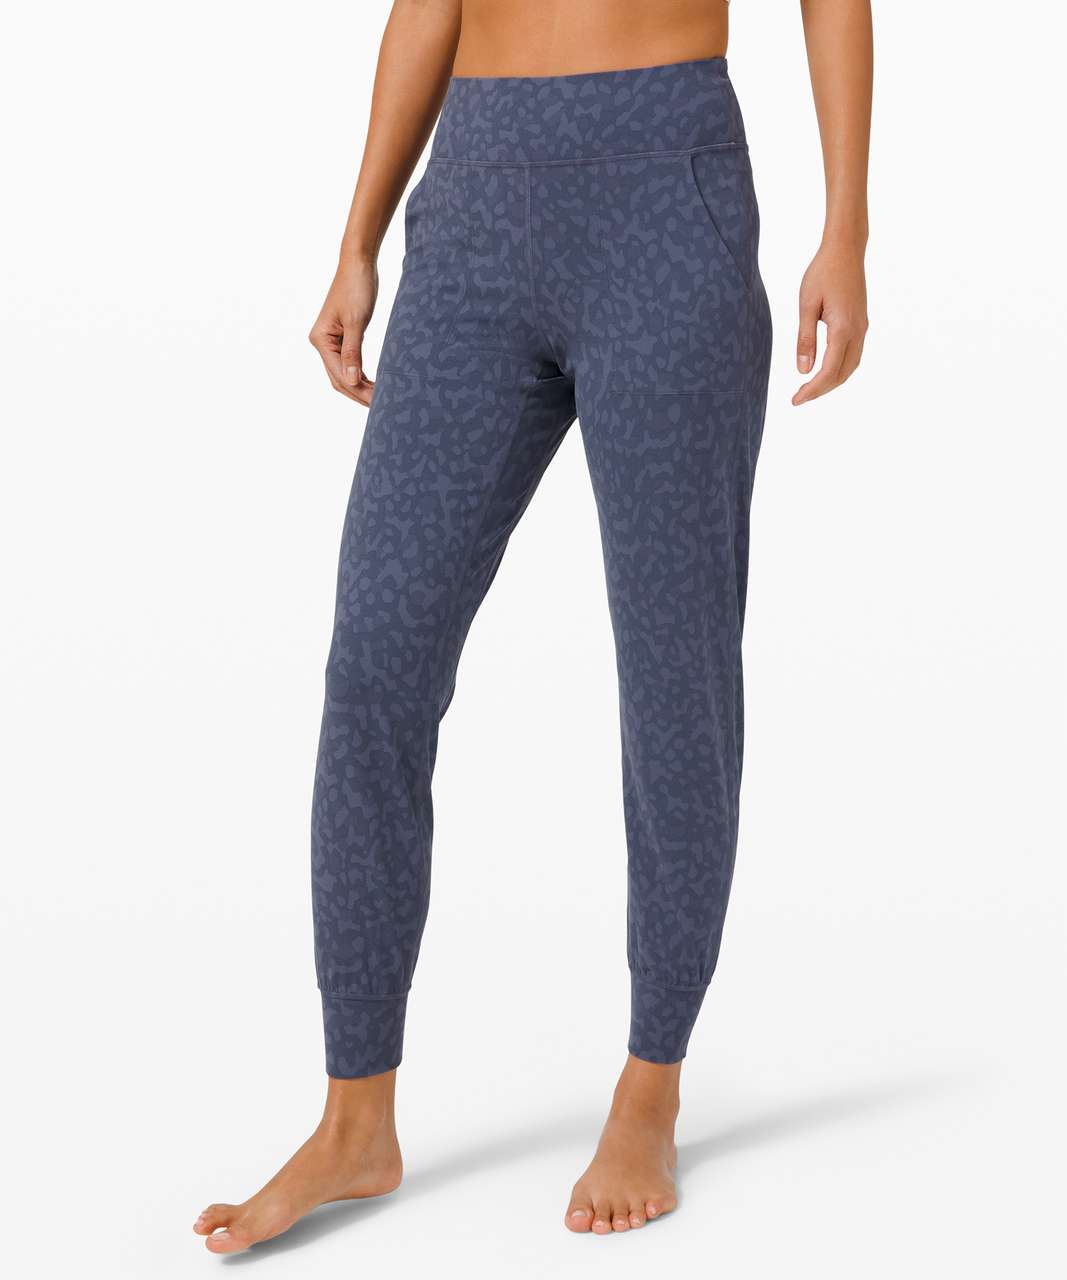 Lululemon Align Leggings? - Multiples and Twins, Forums, What to Expect